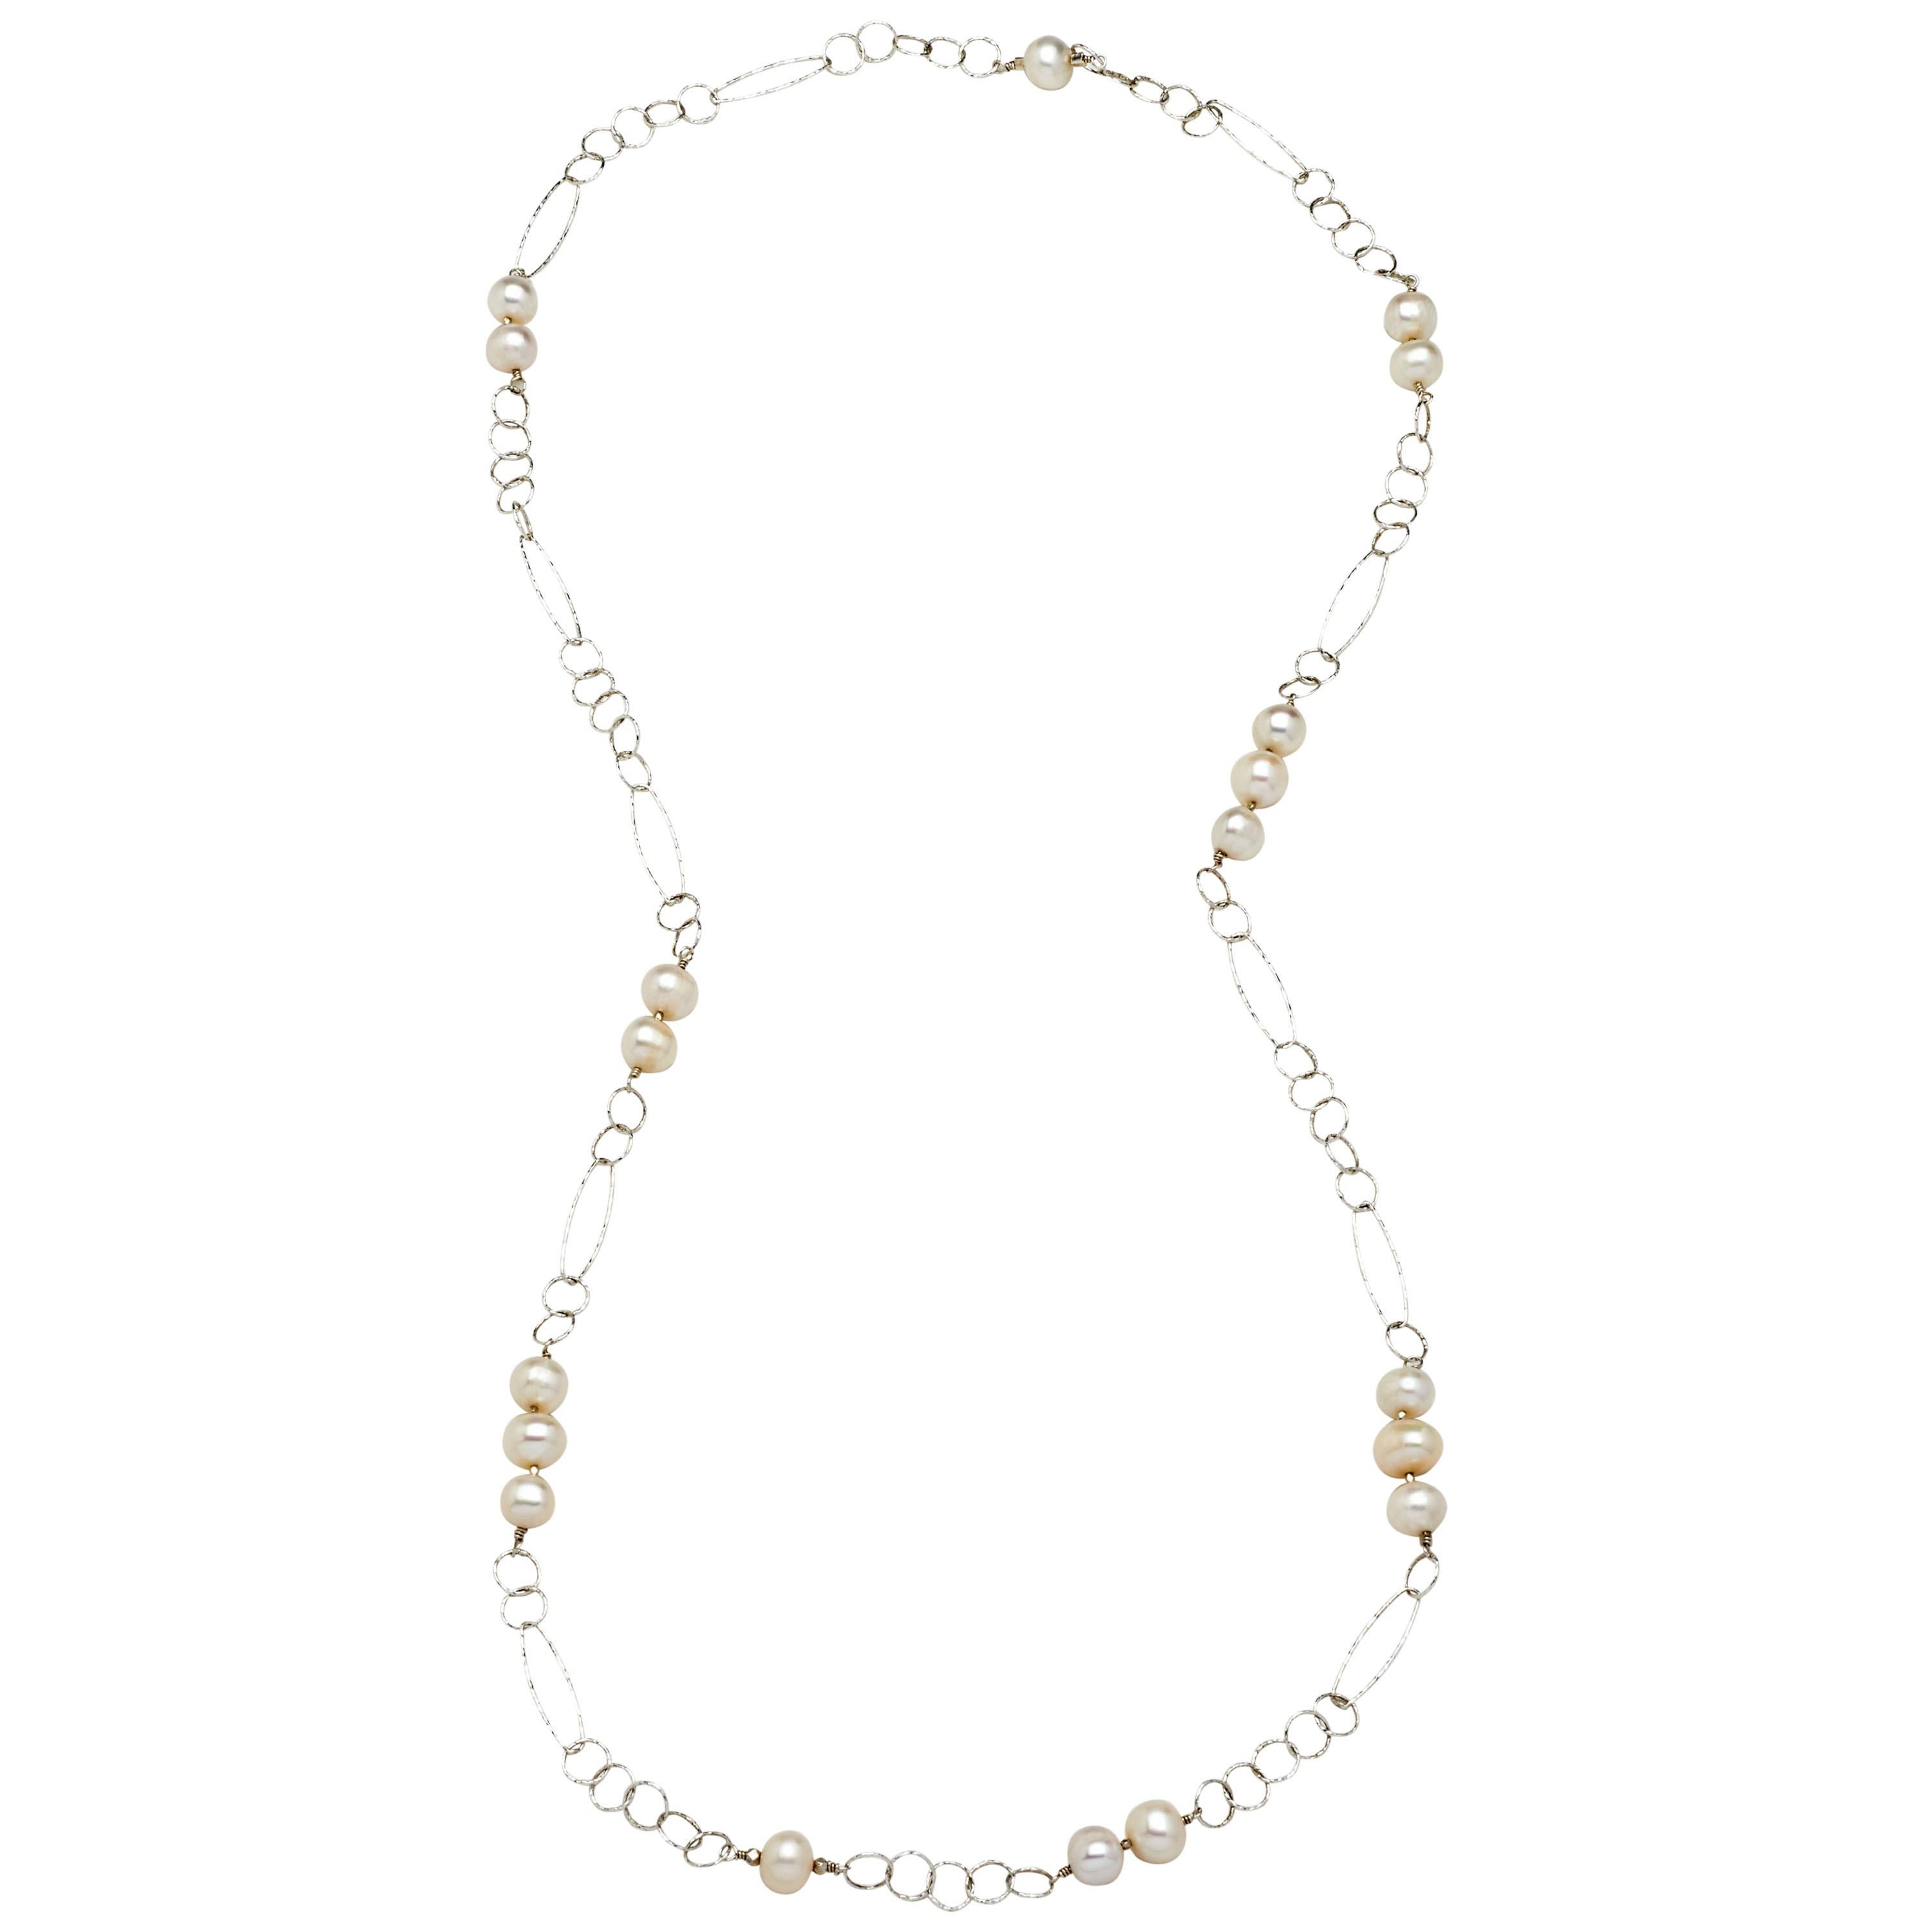 A fresh summer look, lustrous natural AA white off round button pearls integrated with lengthy, shimmering open link sterling silver chain create this
stunning necklace. Measuring 32